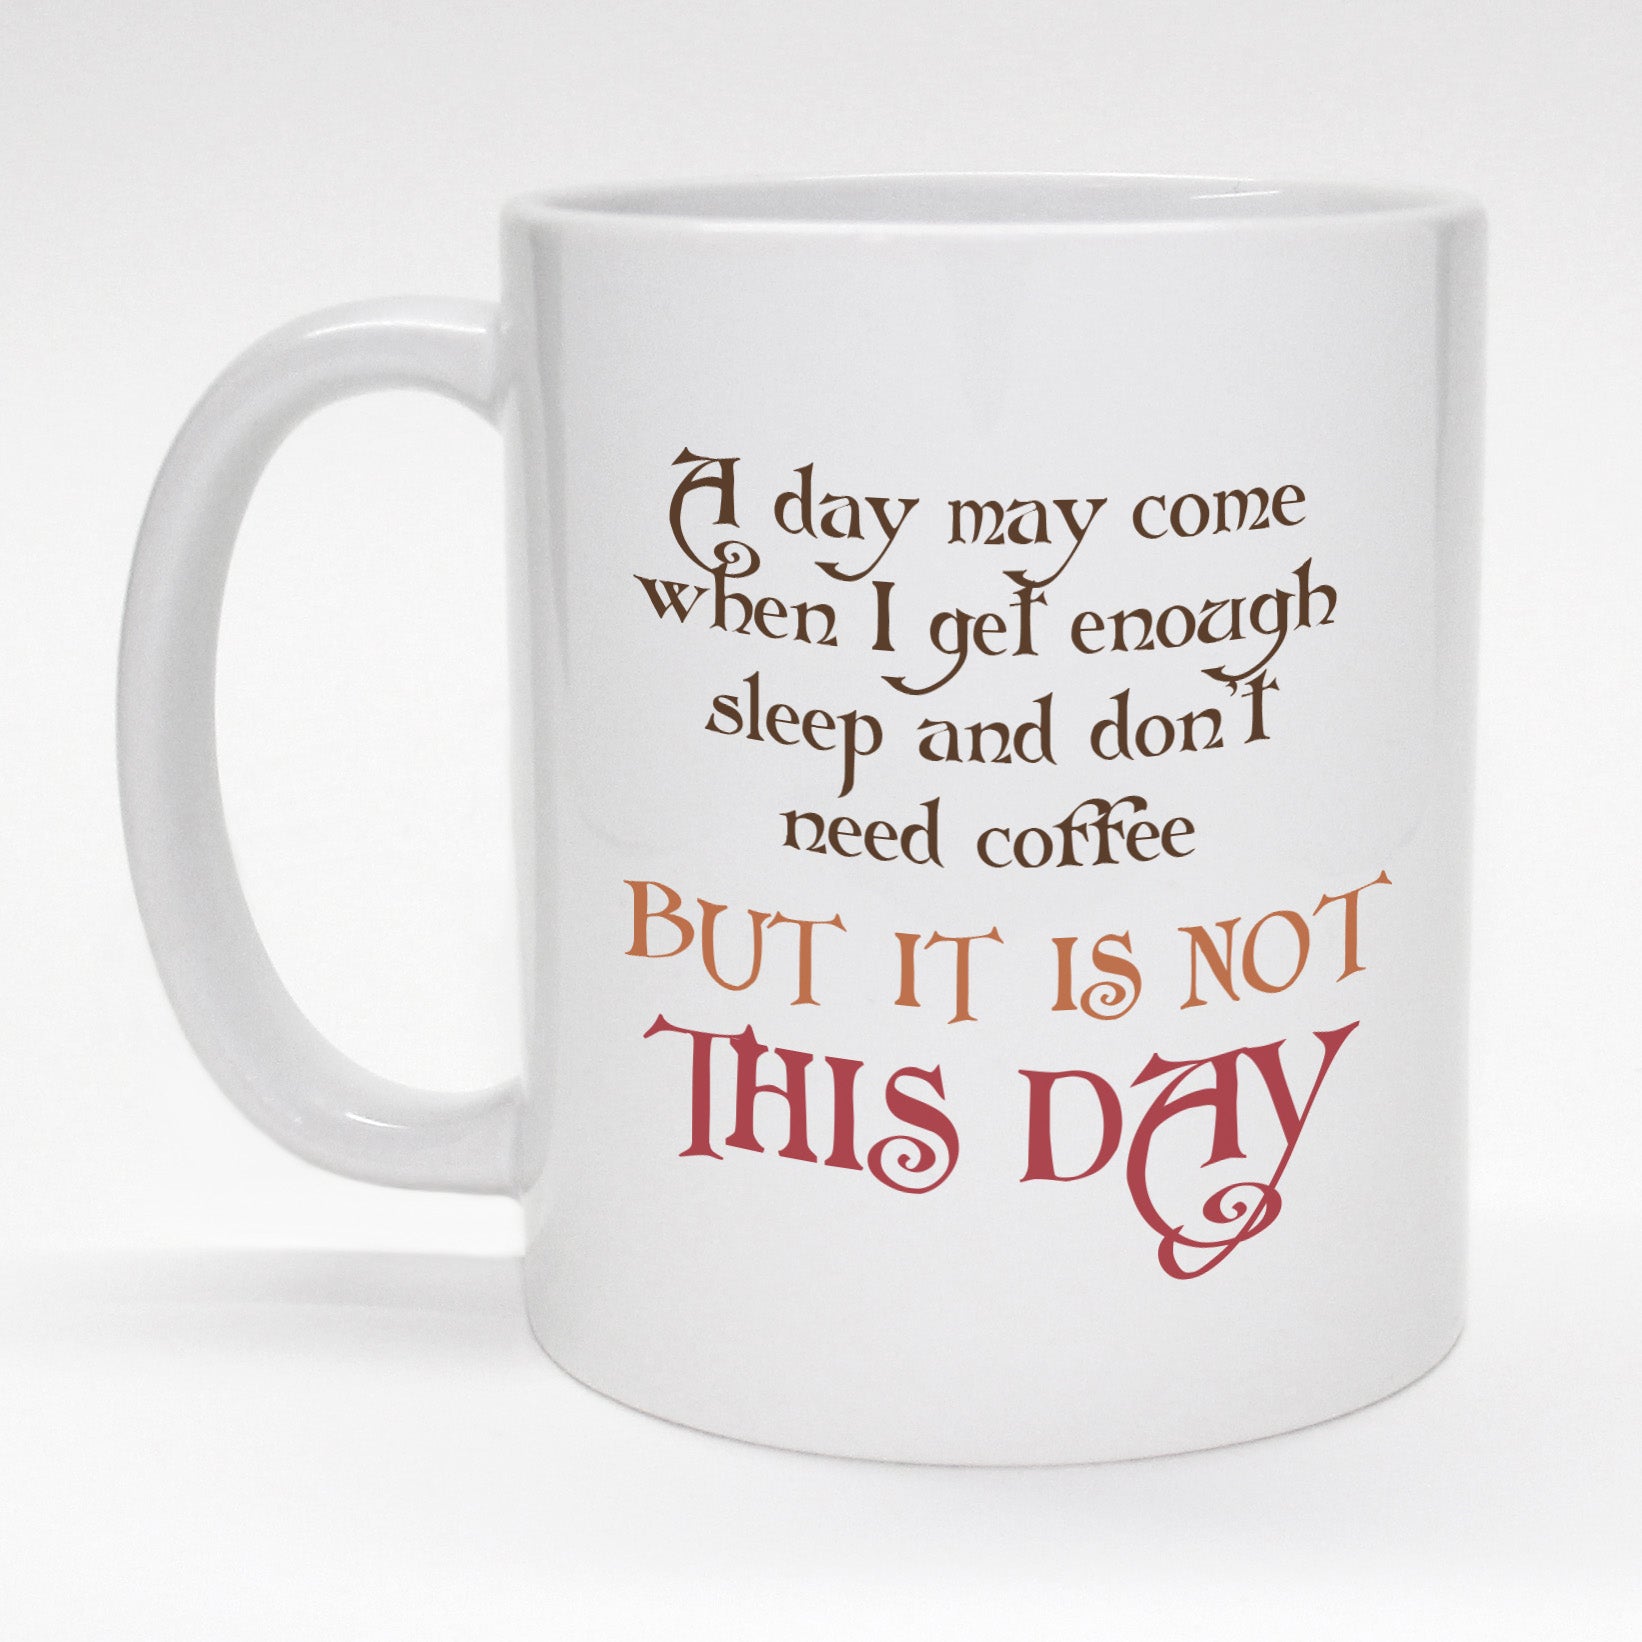 One Ring To Rule Them All Mug Tea Coffee Cup - Book Fantasy Quote Lord Rings